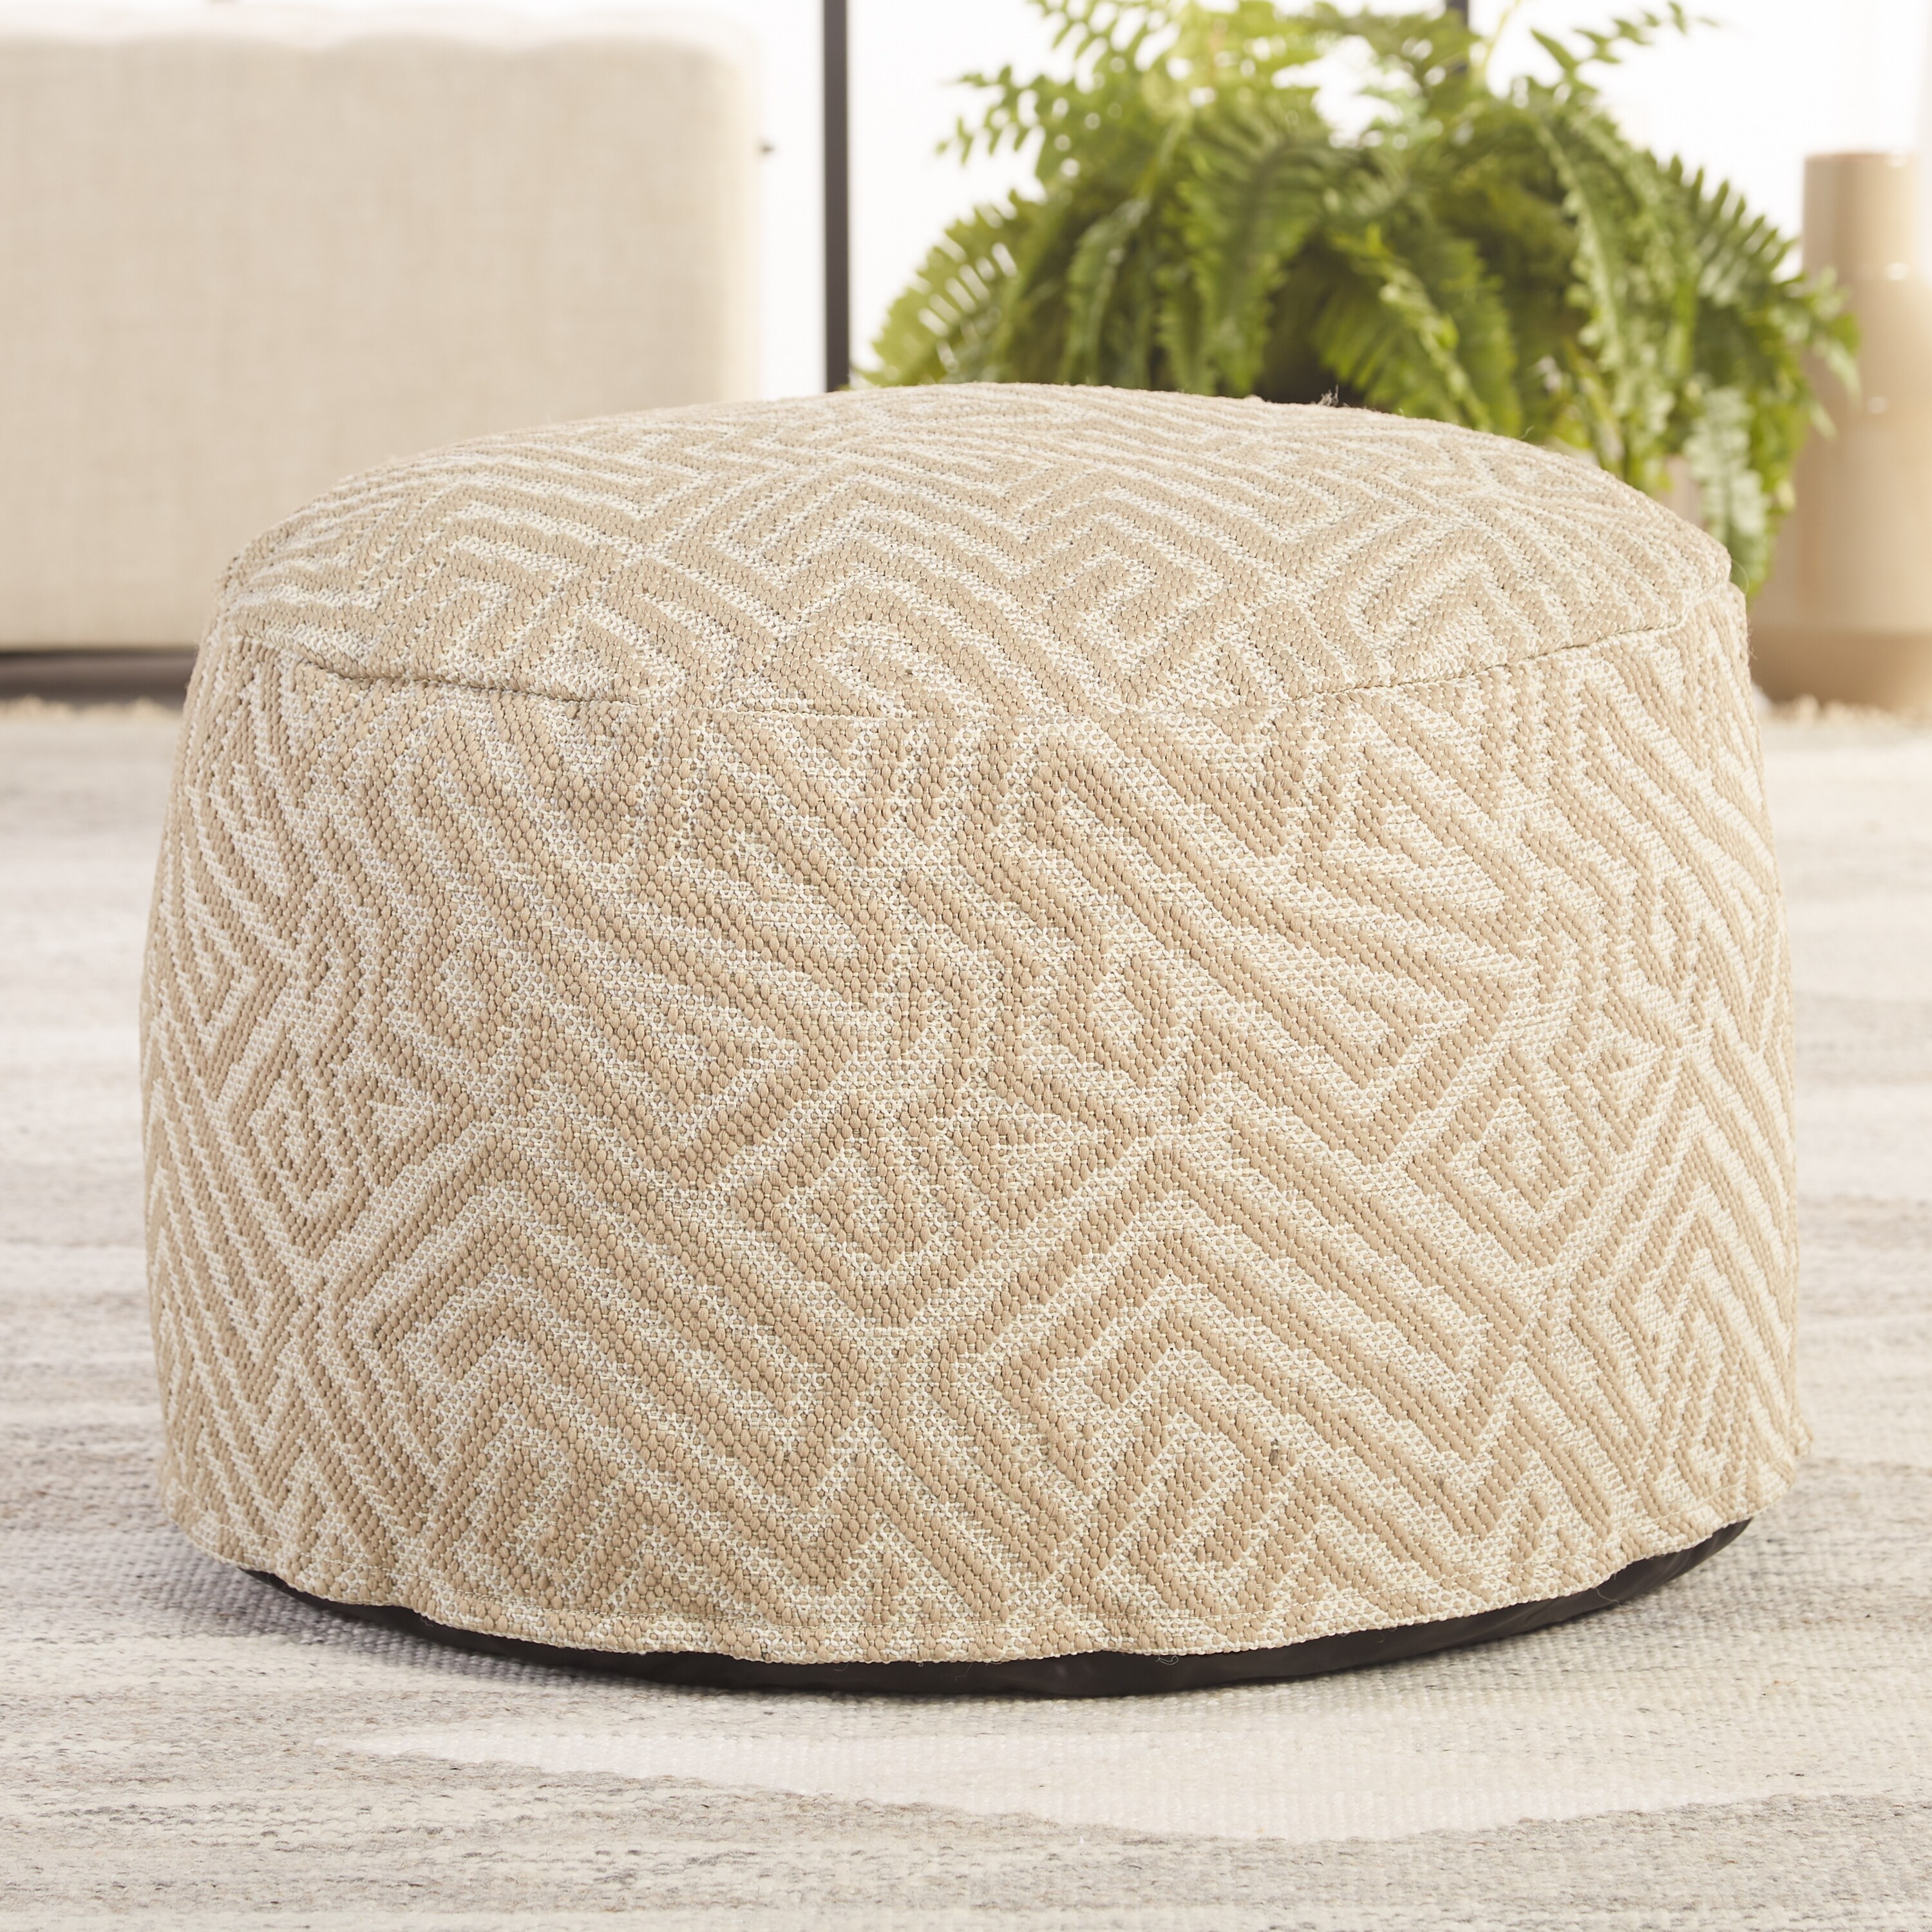 Conroy Indoor/ Outdoor Tribal Taupe/ White Pouf Floor Pillow - 24x24x13